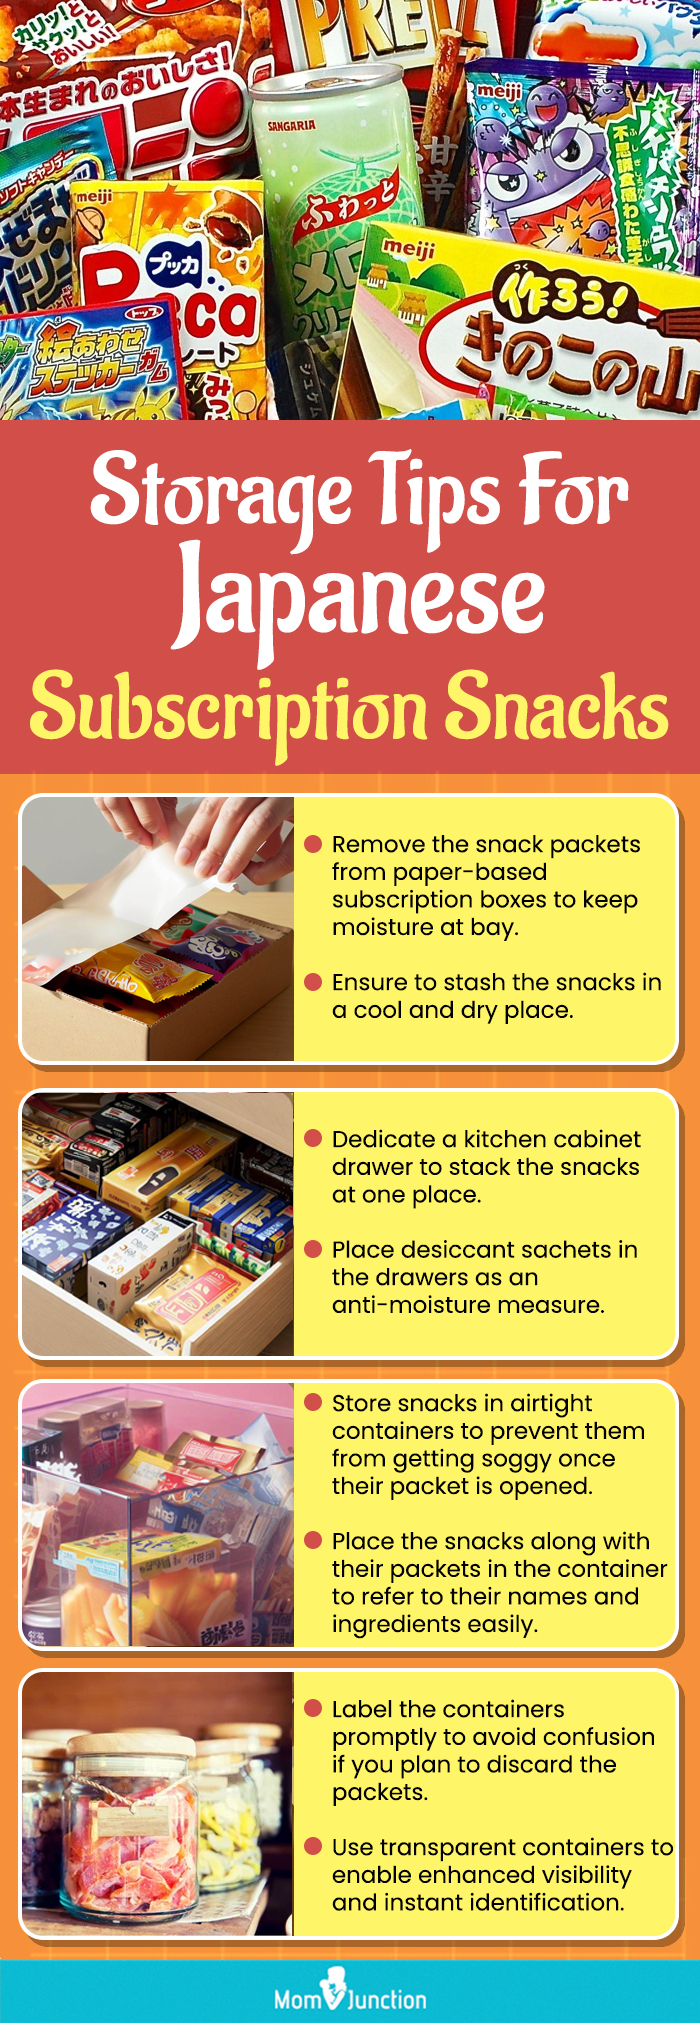 Storage Tips For Japanese Subscription Snacks (infographic)